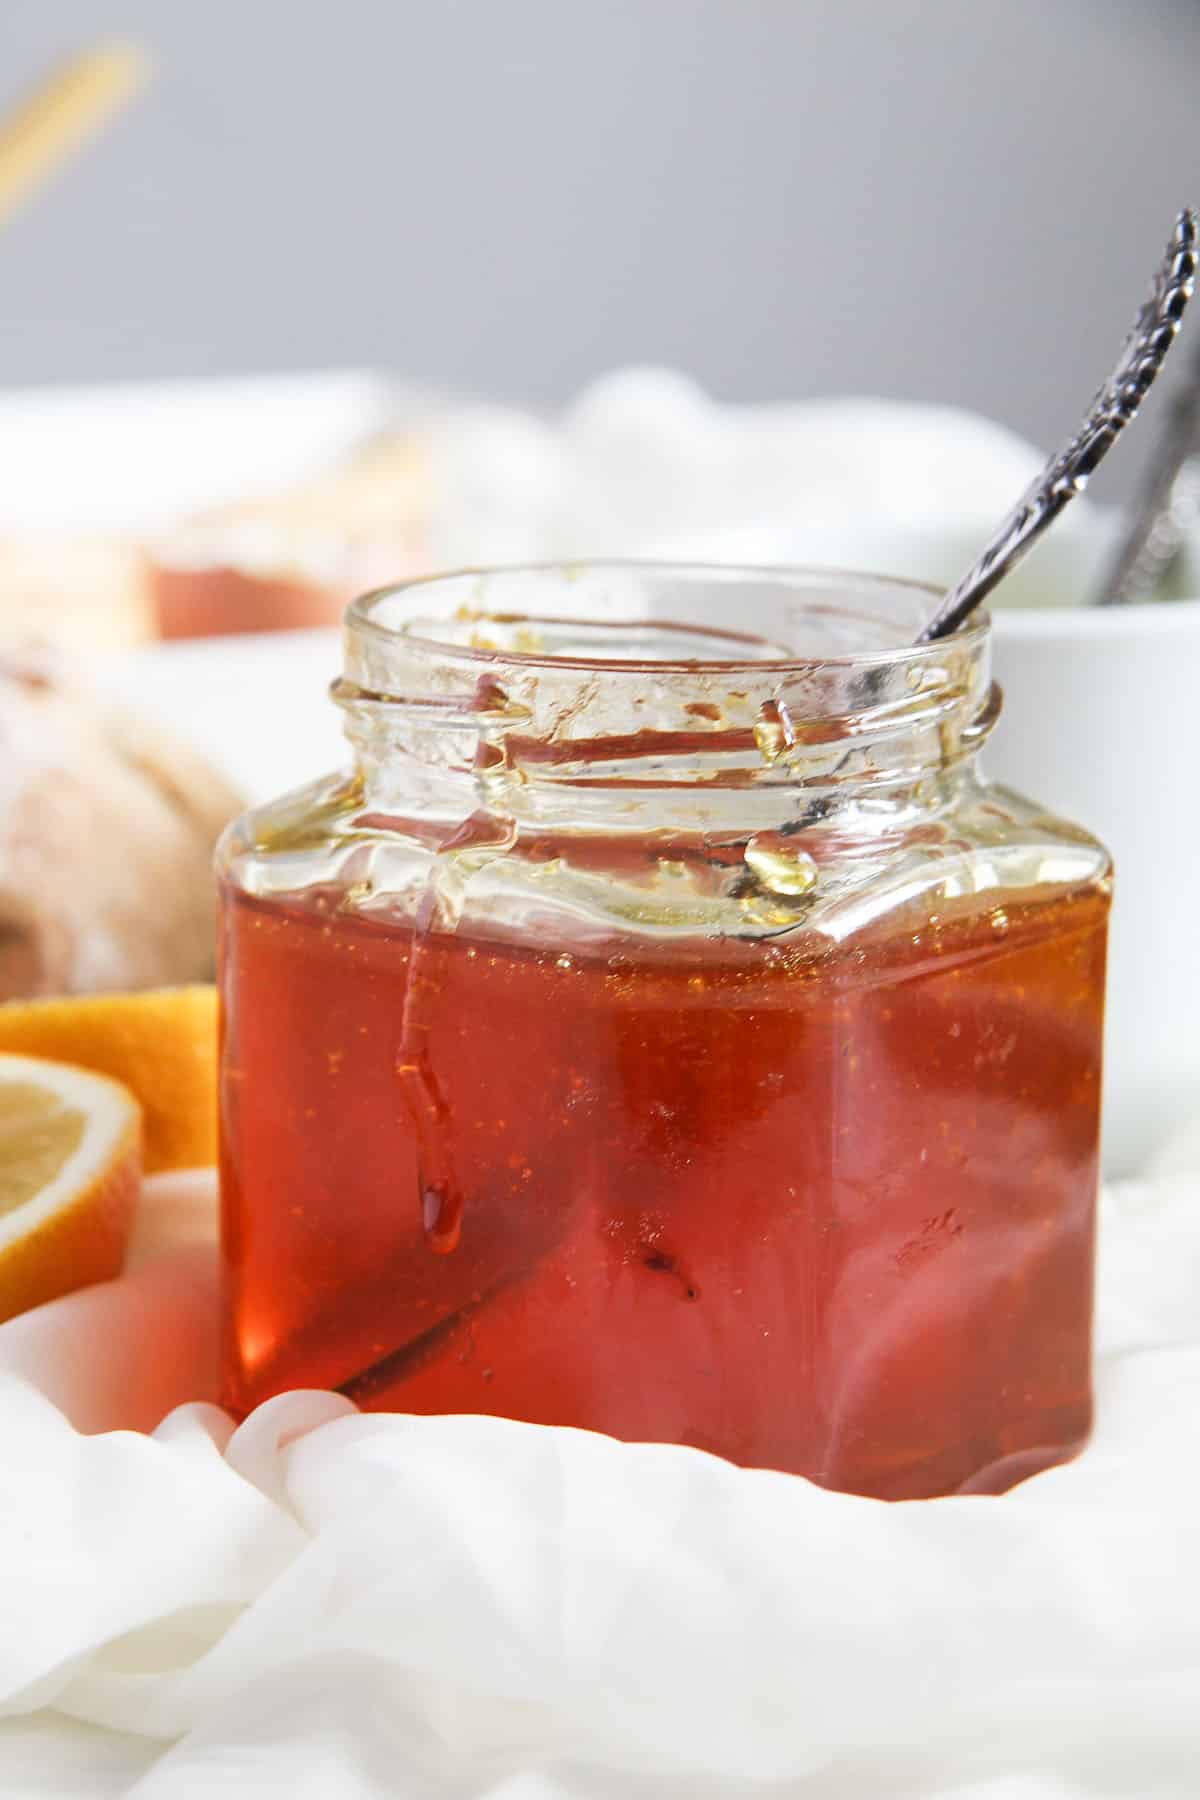 lemon jelly in a small jar with a spoon in it.